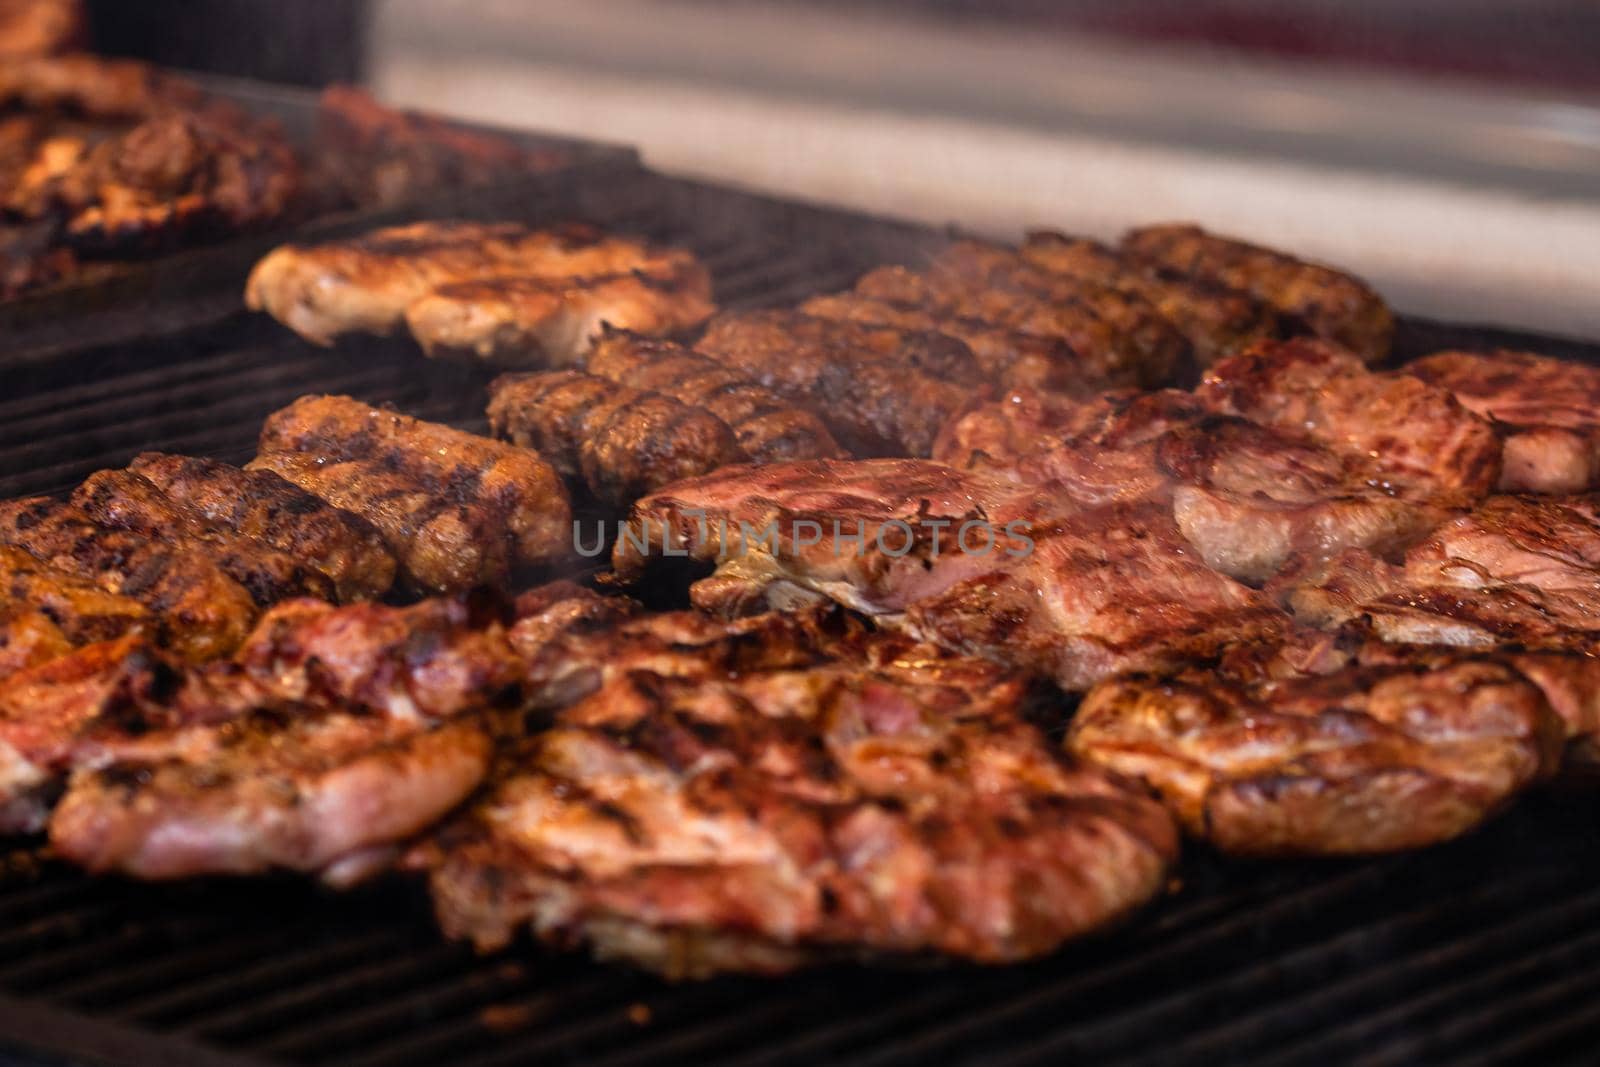 Grilling tasty food on barbecue. Steak, sausages on grill at food festival by vladispas